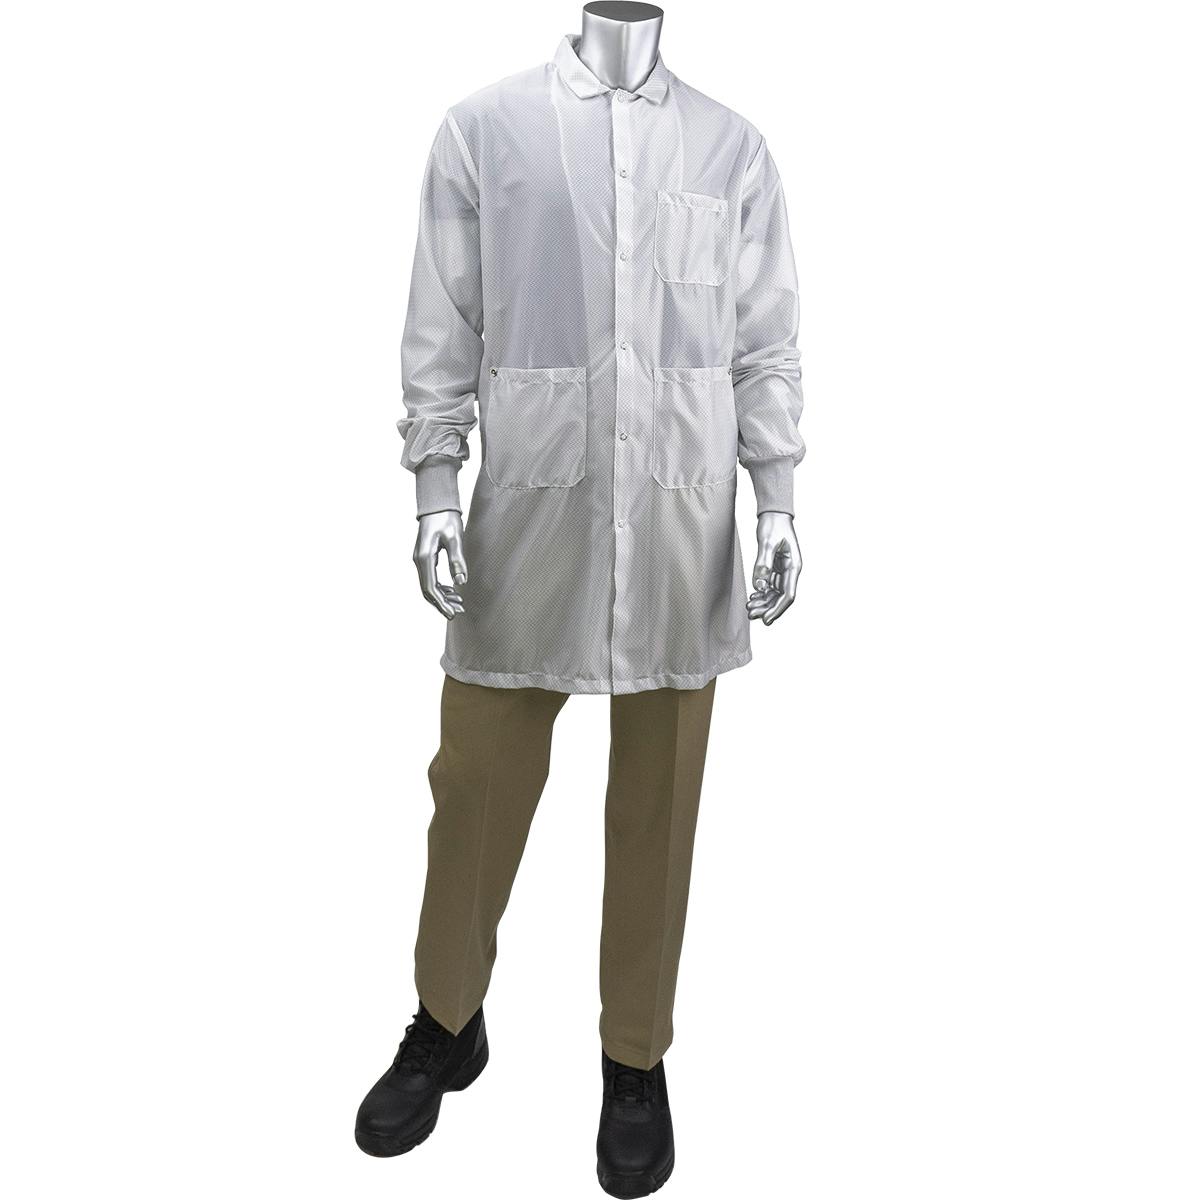 StatStar Long ESD Labcoat - ESD Knit Cuff, White (BR51C-44WH)